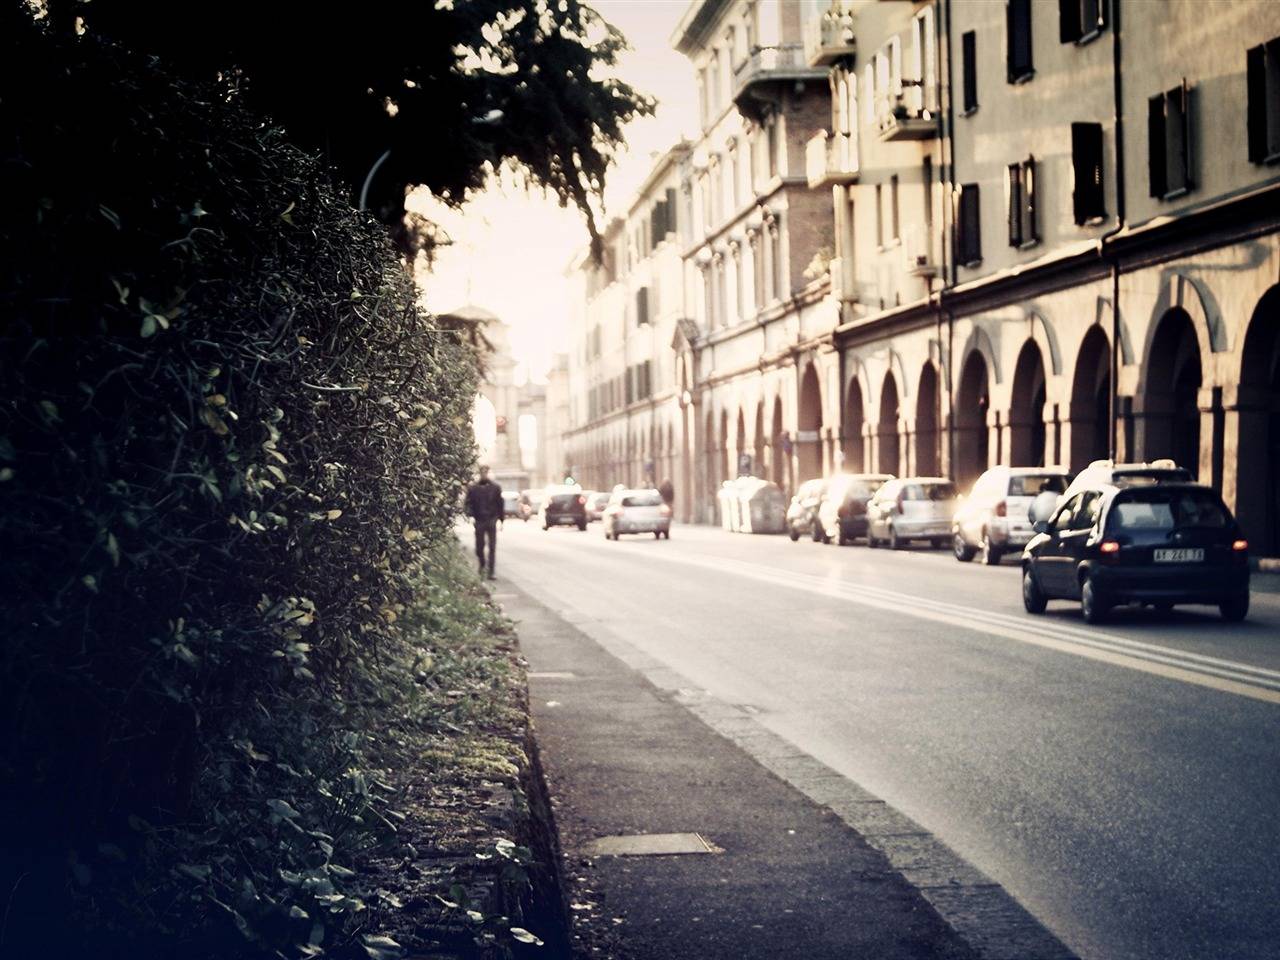 streets_in_italy-City_photography_wallpaper_1280x960.jpg